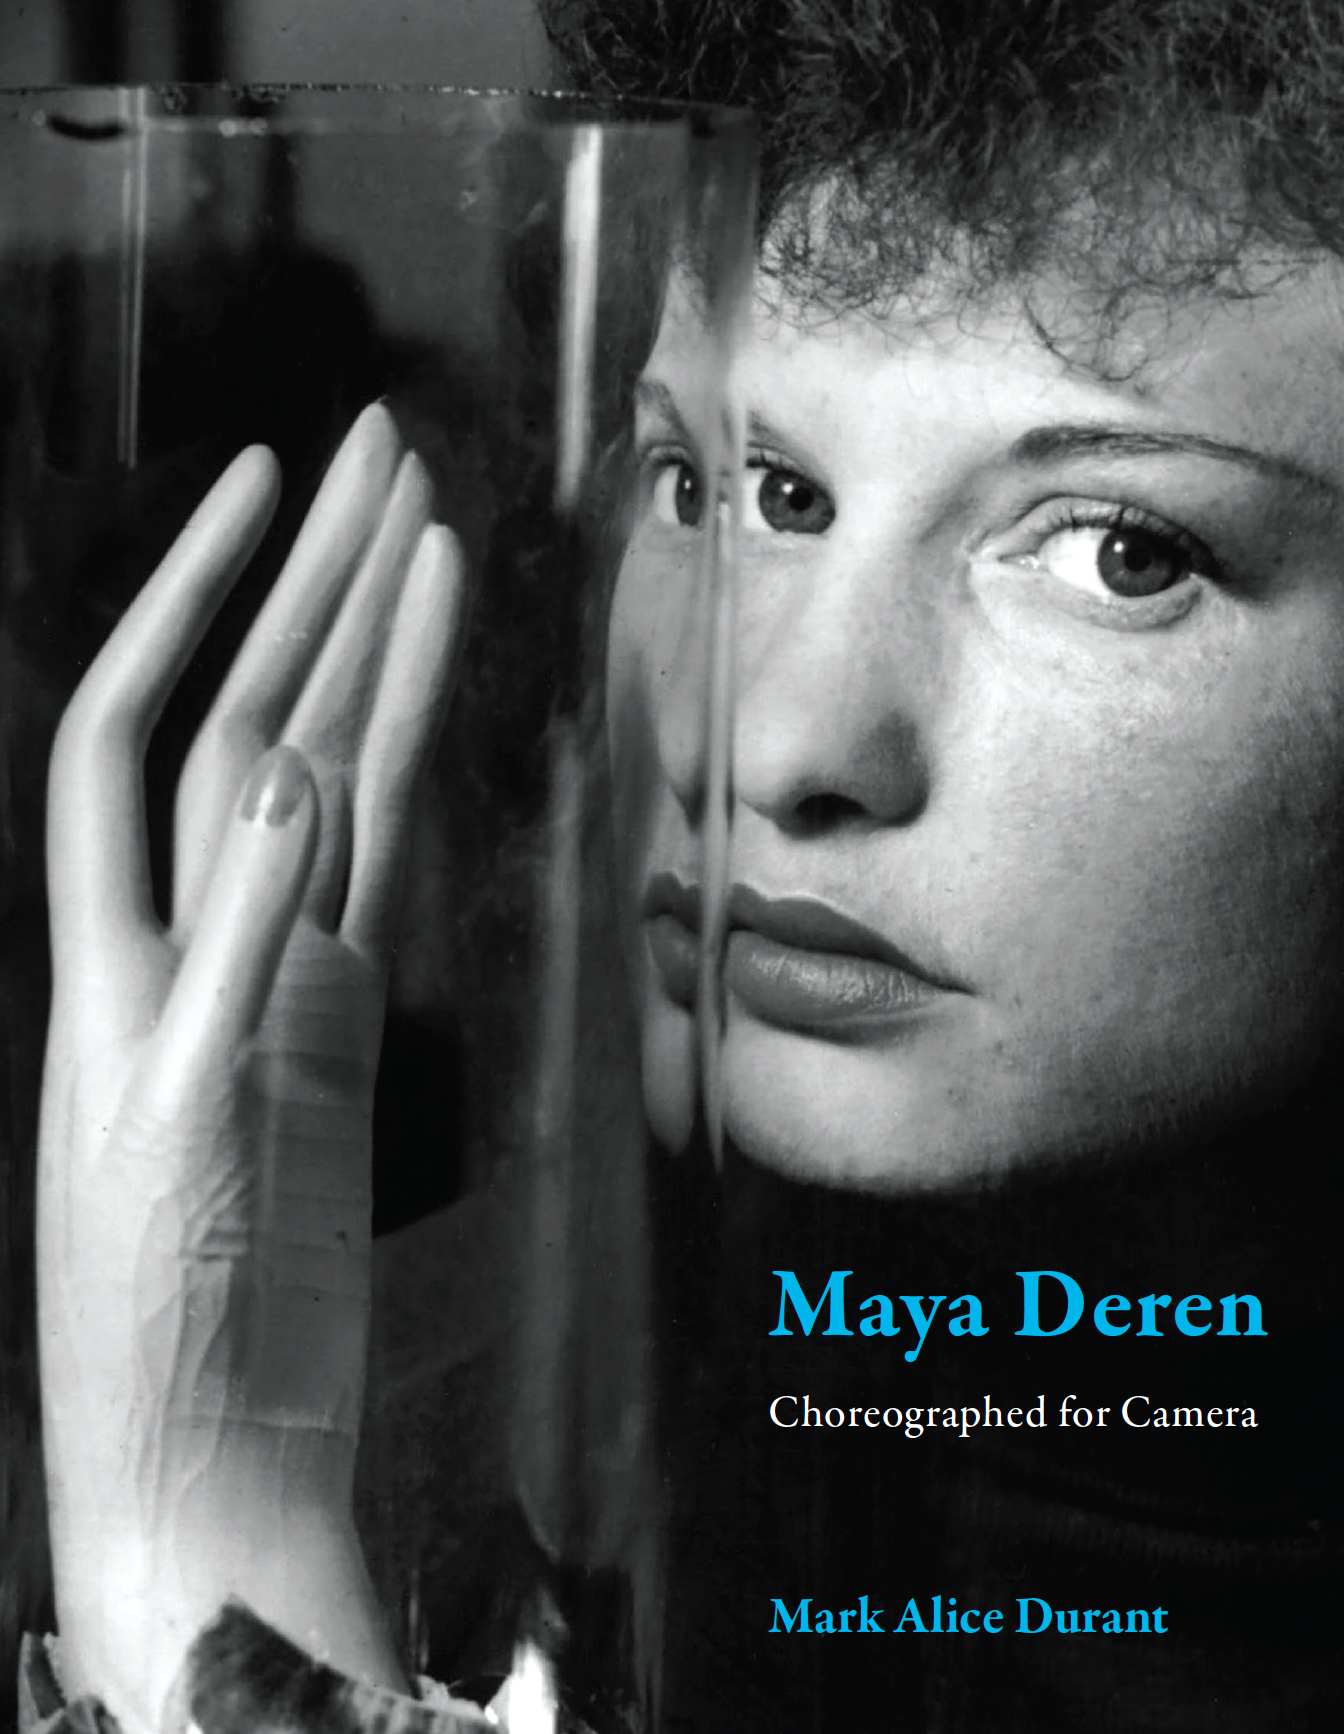 Sometimes I Am What I Really Am: On Mark Alice Durant’s “Maya Deren”